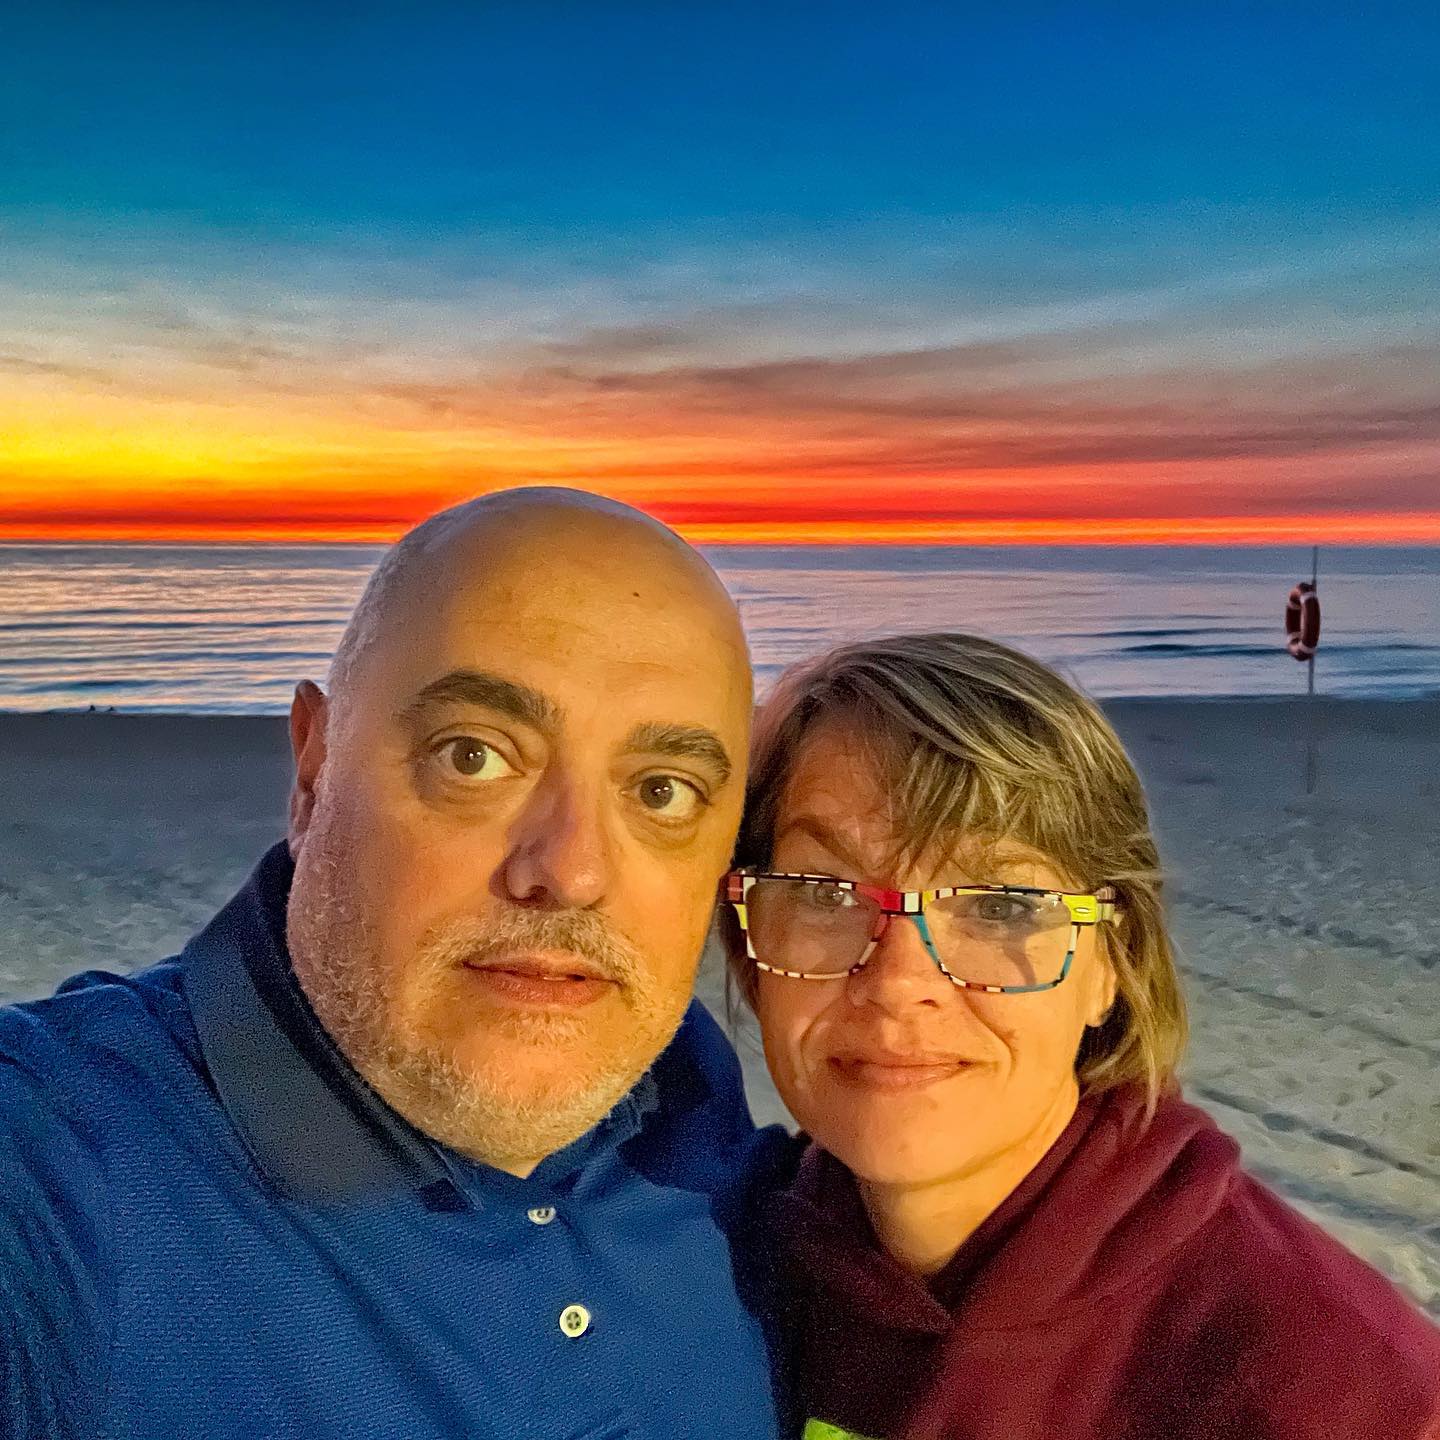 Hey Pam, take a sunset selfie with me.